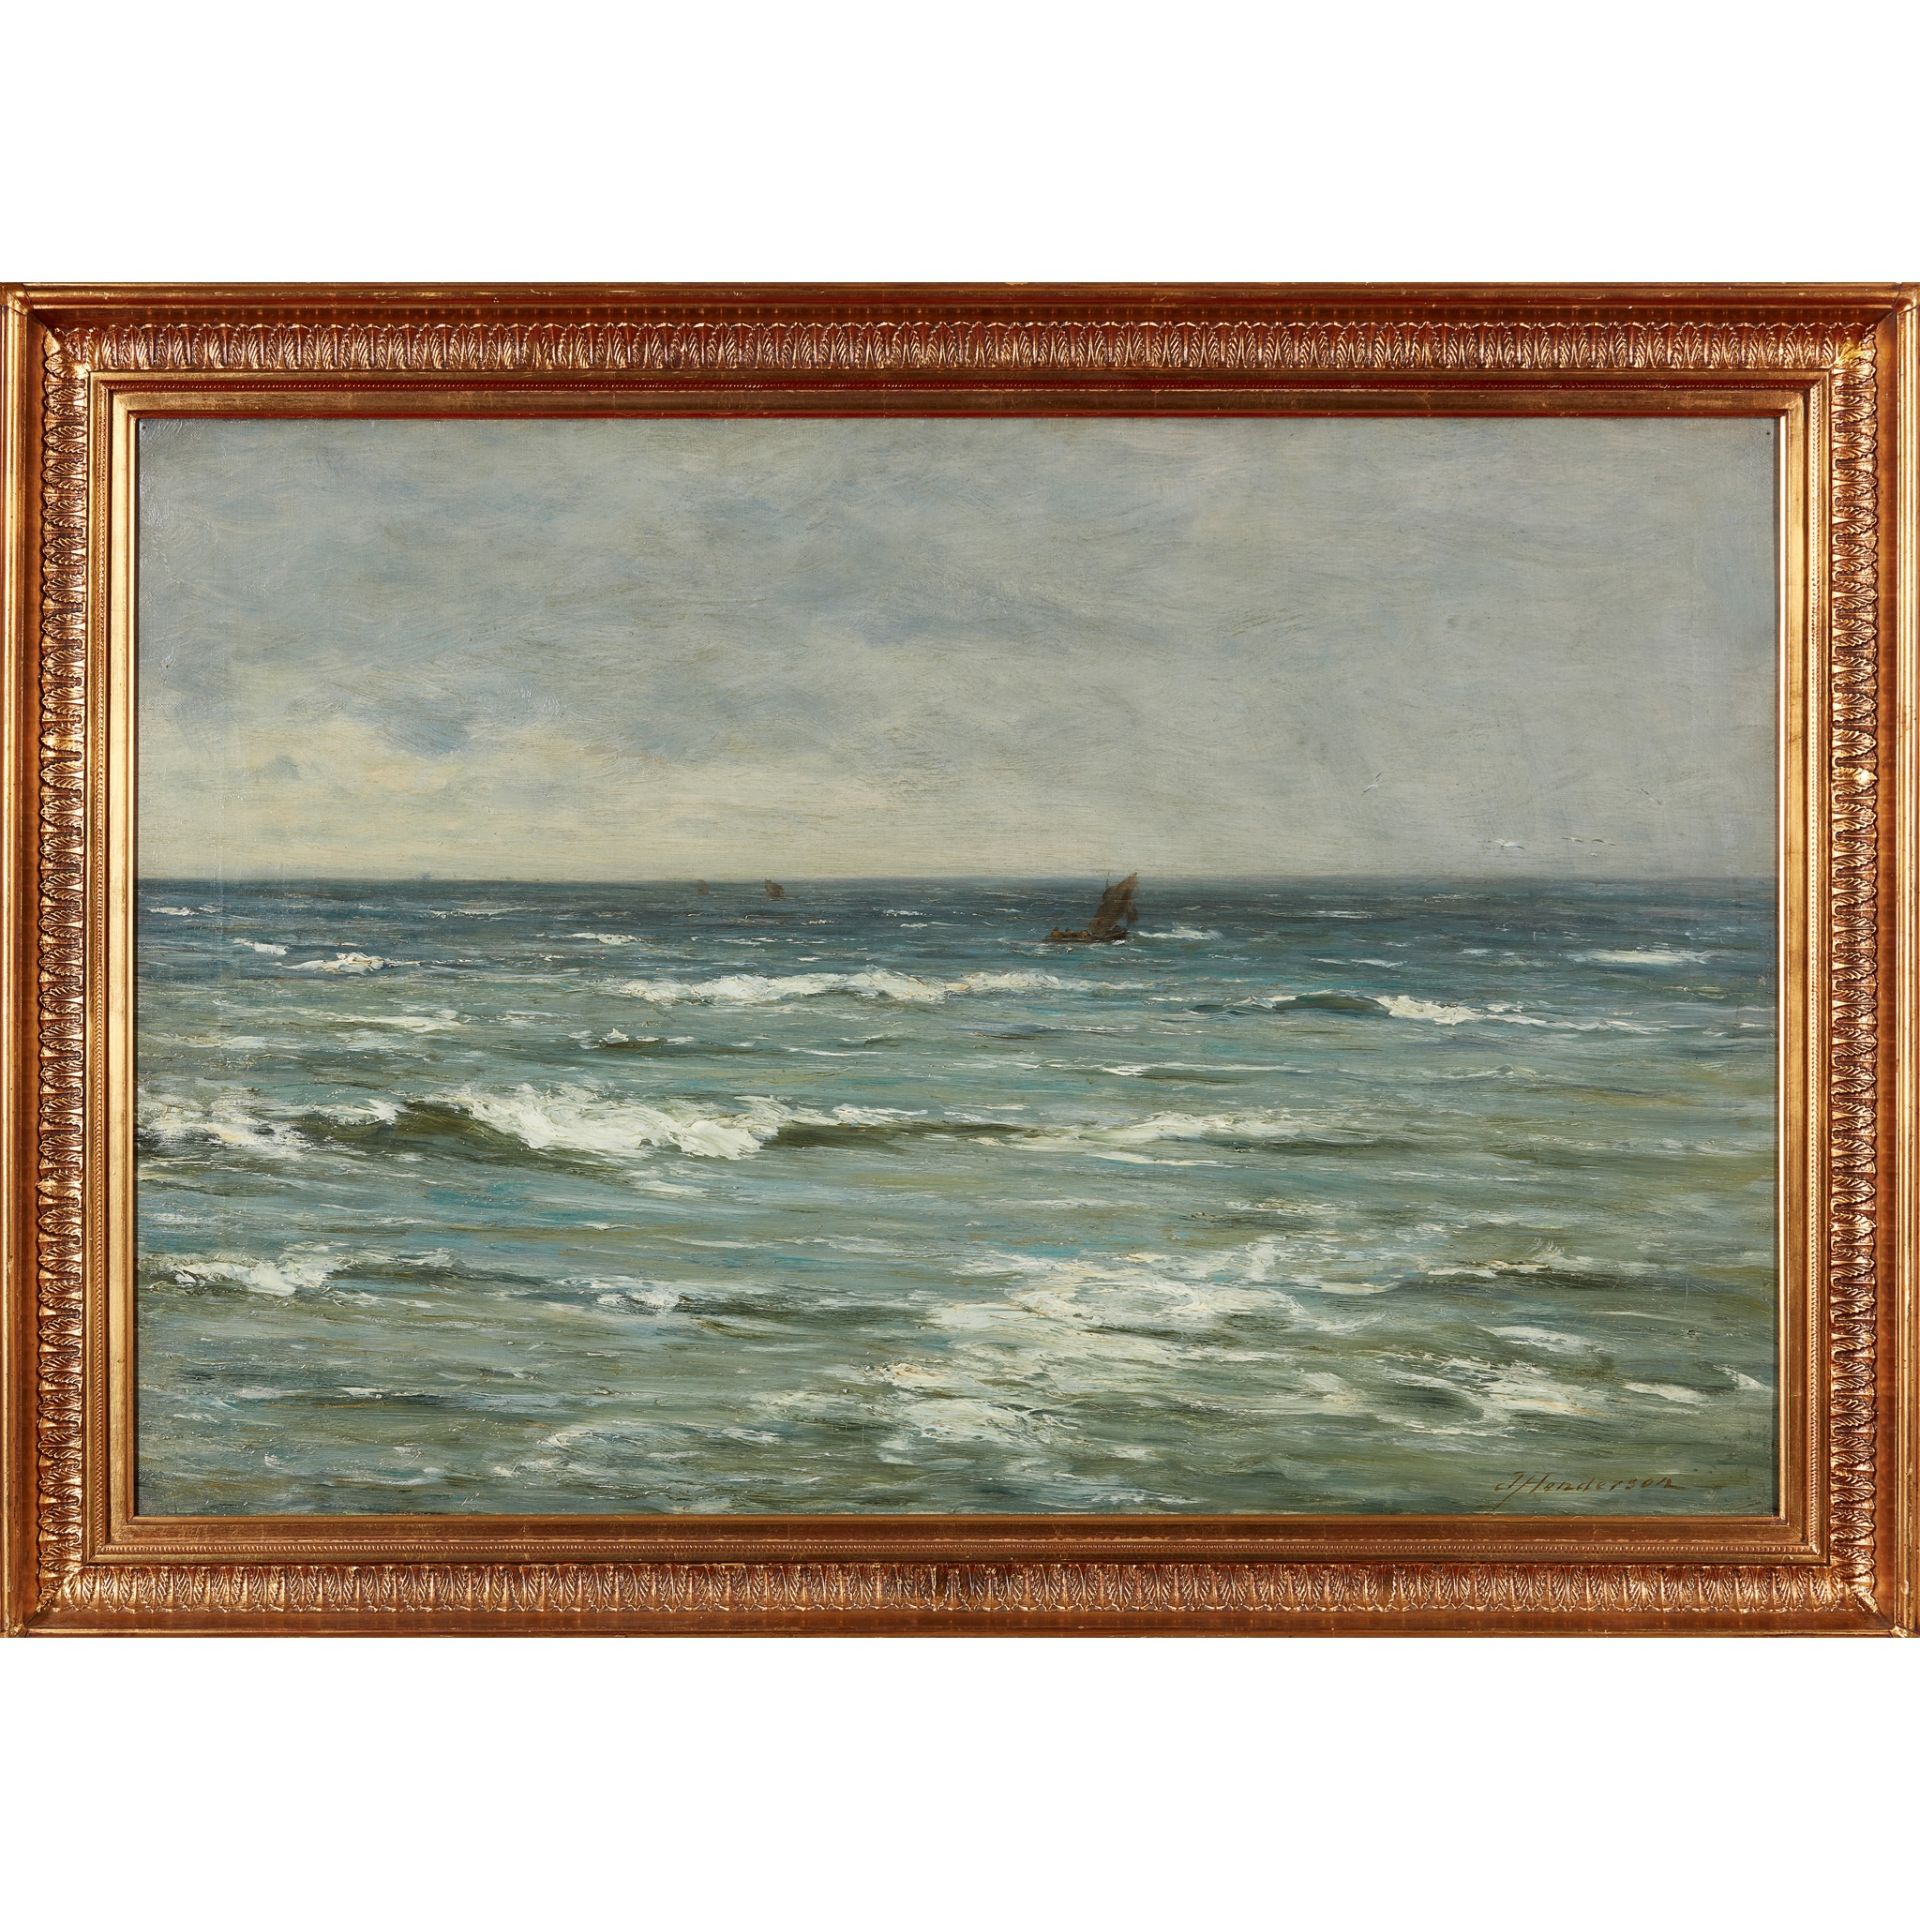 JOSEPH HENDERSON R.S.W (SCOTTISH 1832-1908) THE OPEN SEA WITH DISTANT FISHING BOATS - Image 2 of 3